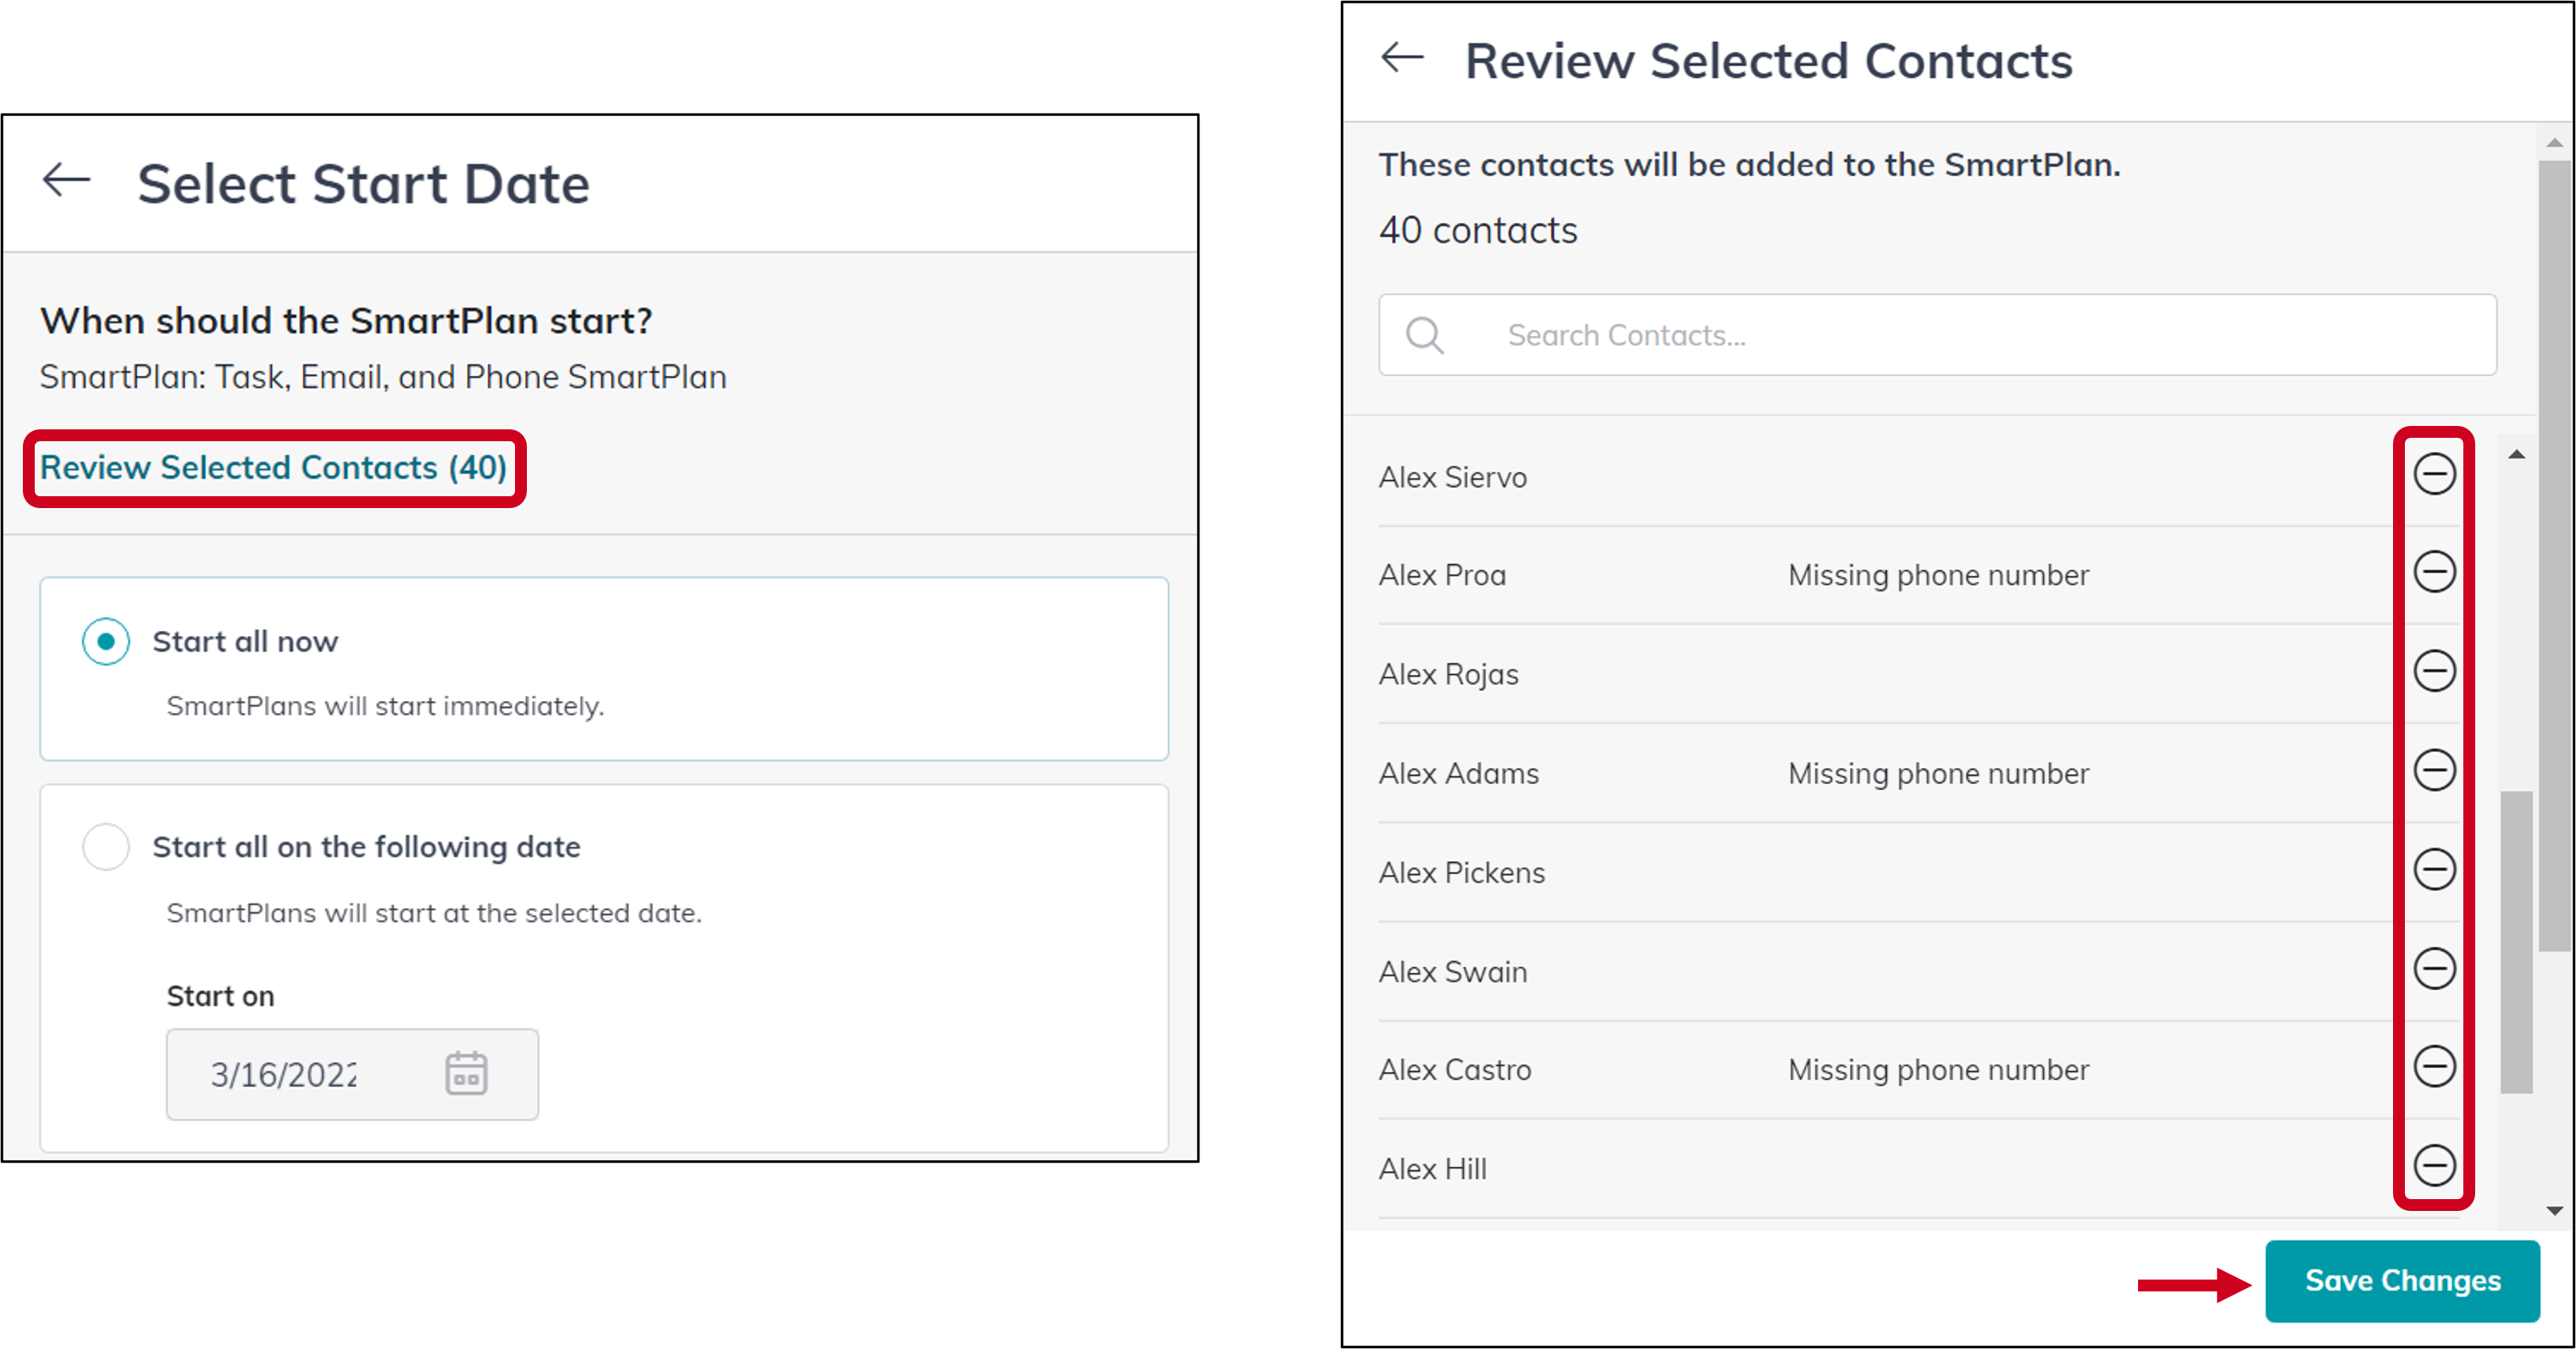 sp_review_selected_contacts.png